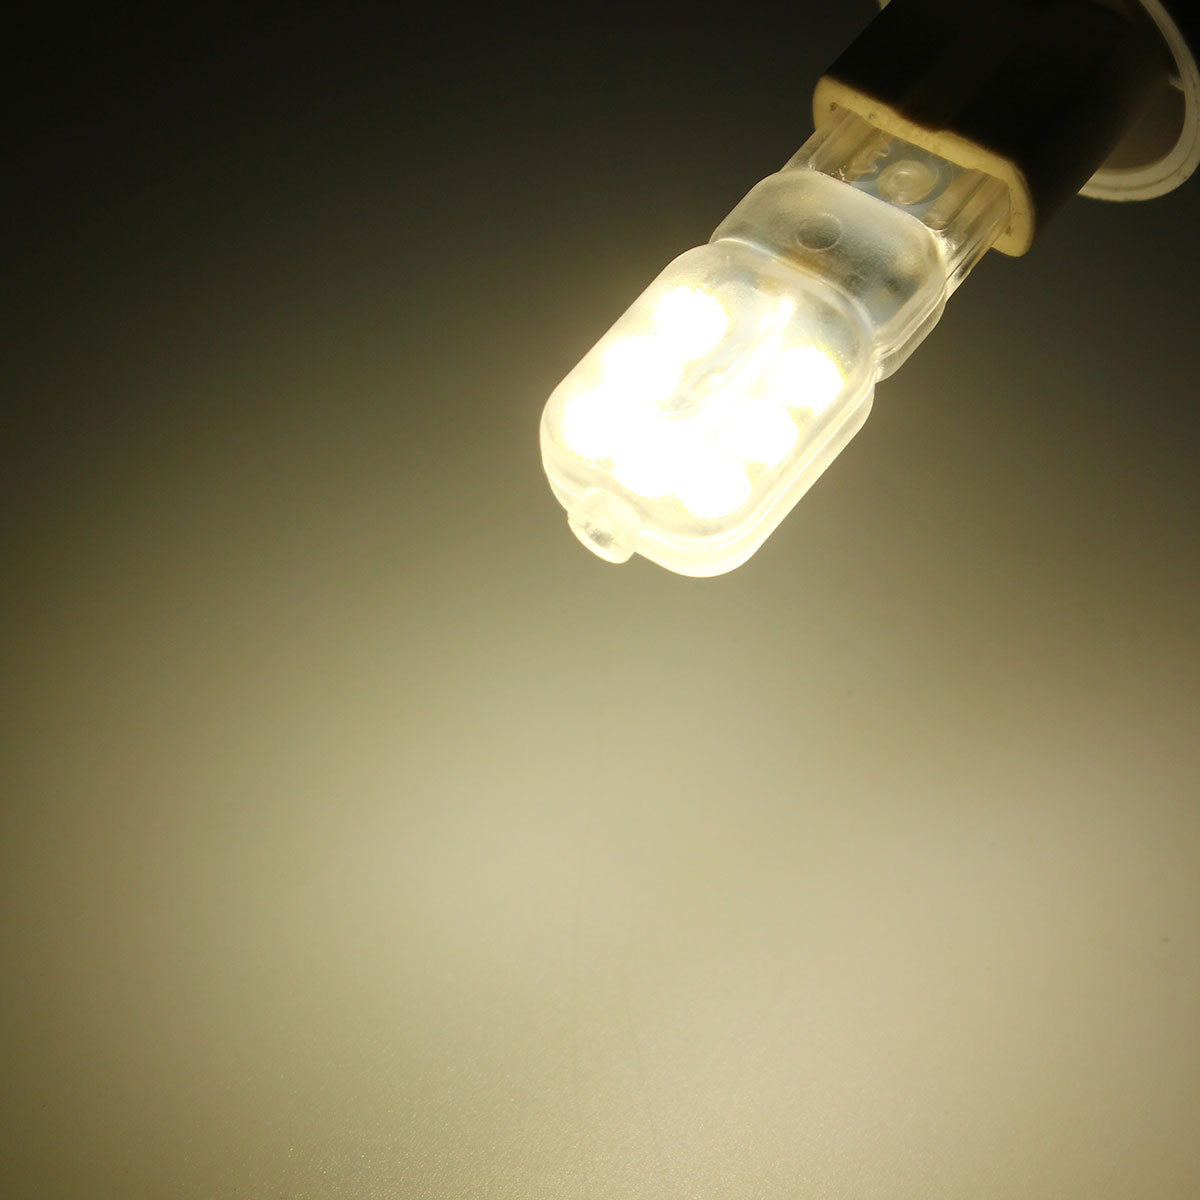 Dimmable-G9-25W-14-SMD-2835-LED-Pure-White-Warm-White-Natural-White-Light-Lamp-Bulb-AC110VAC220V-1073443-3